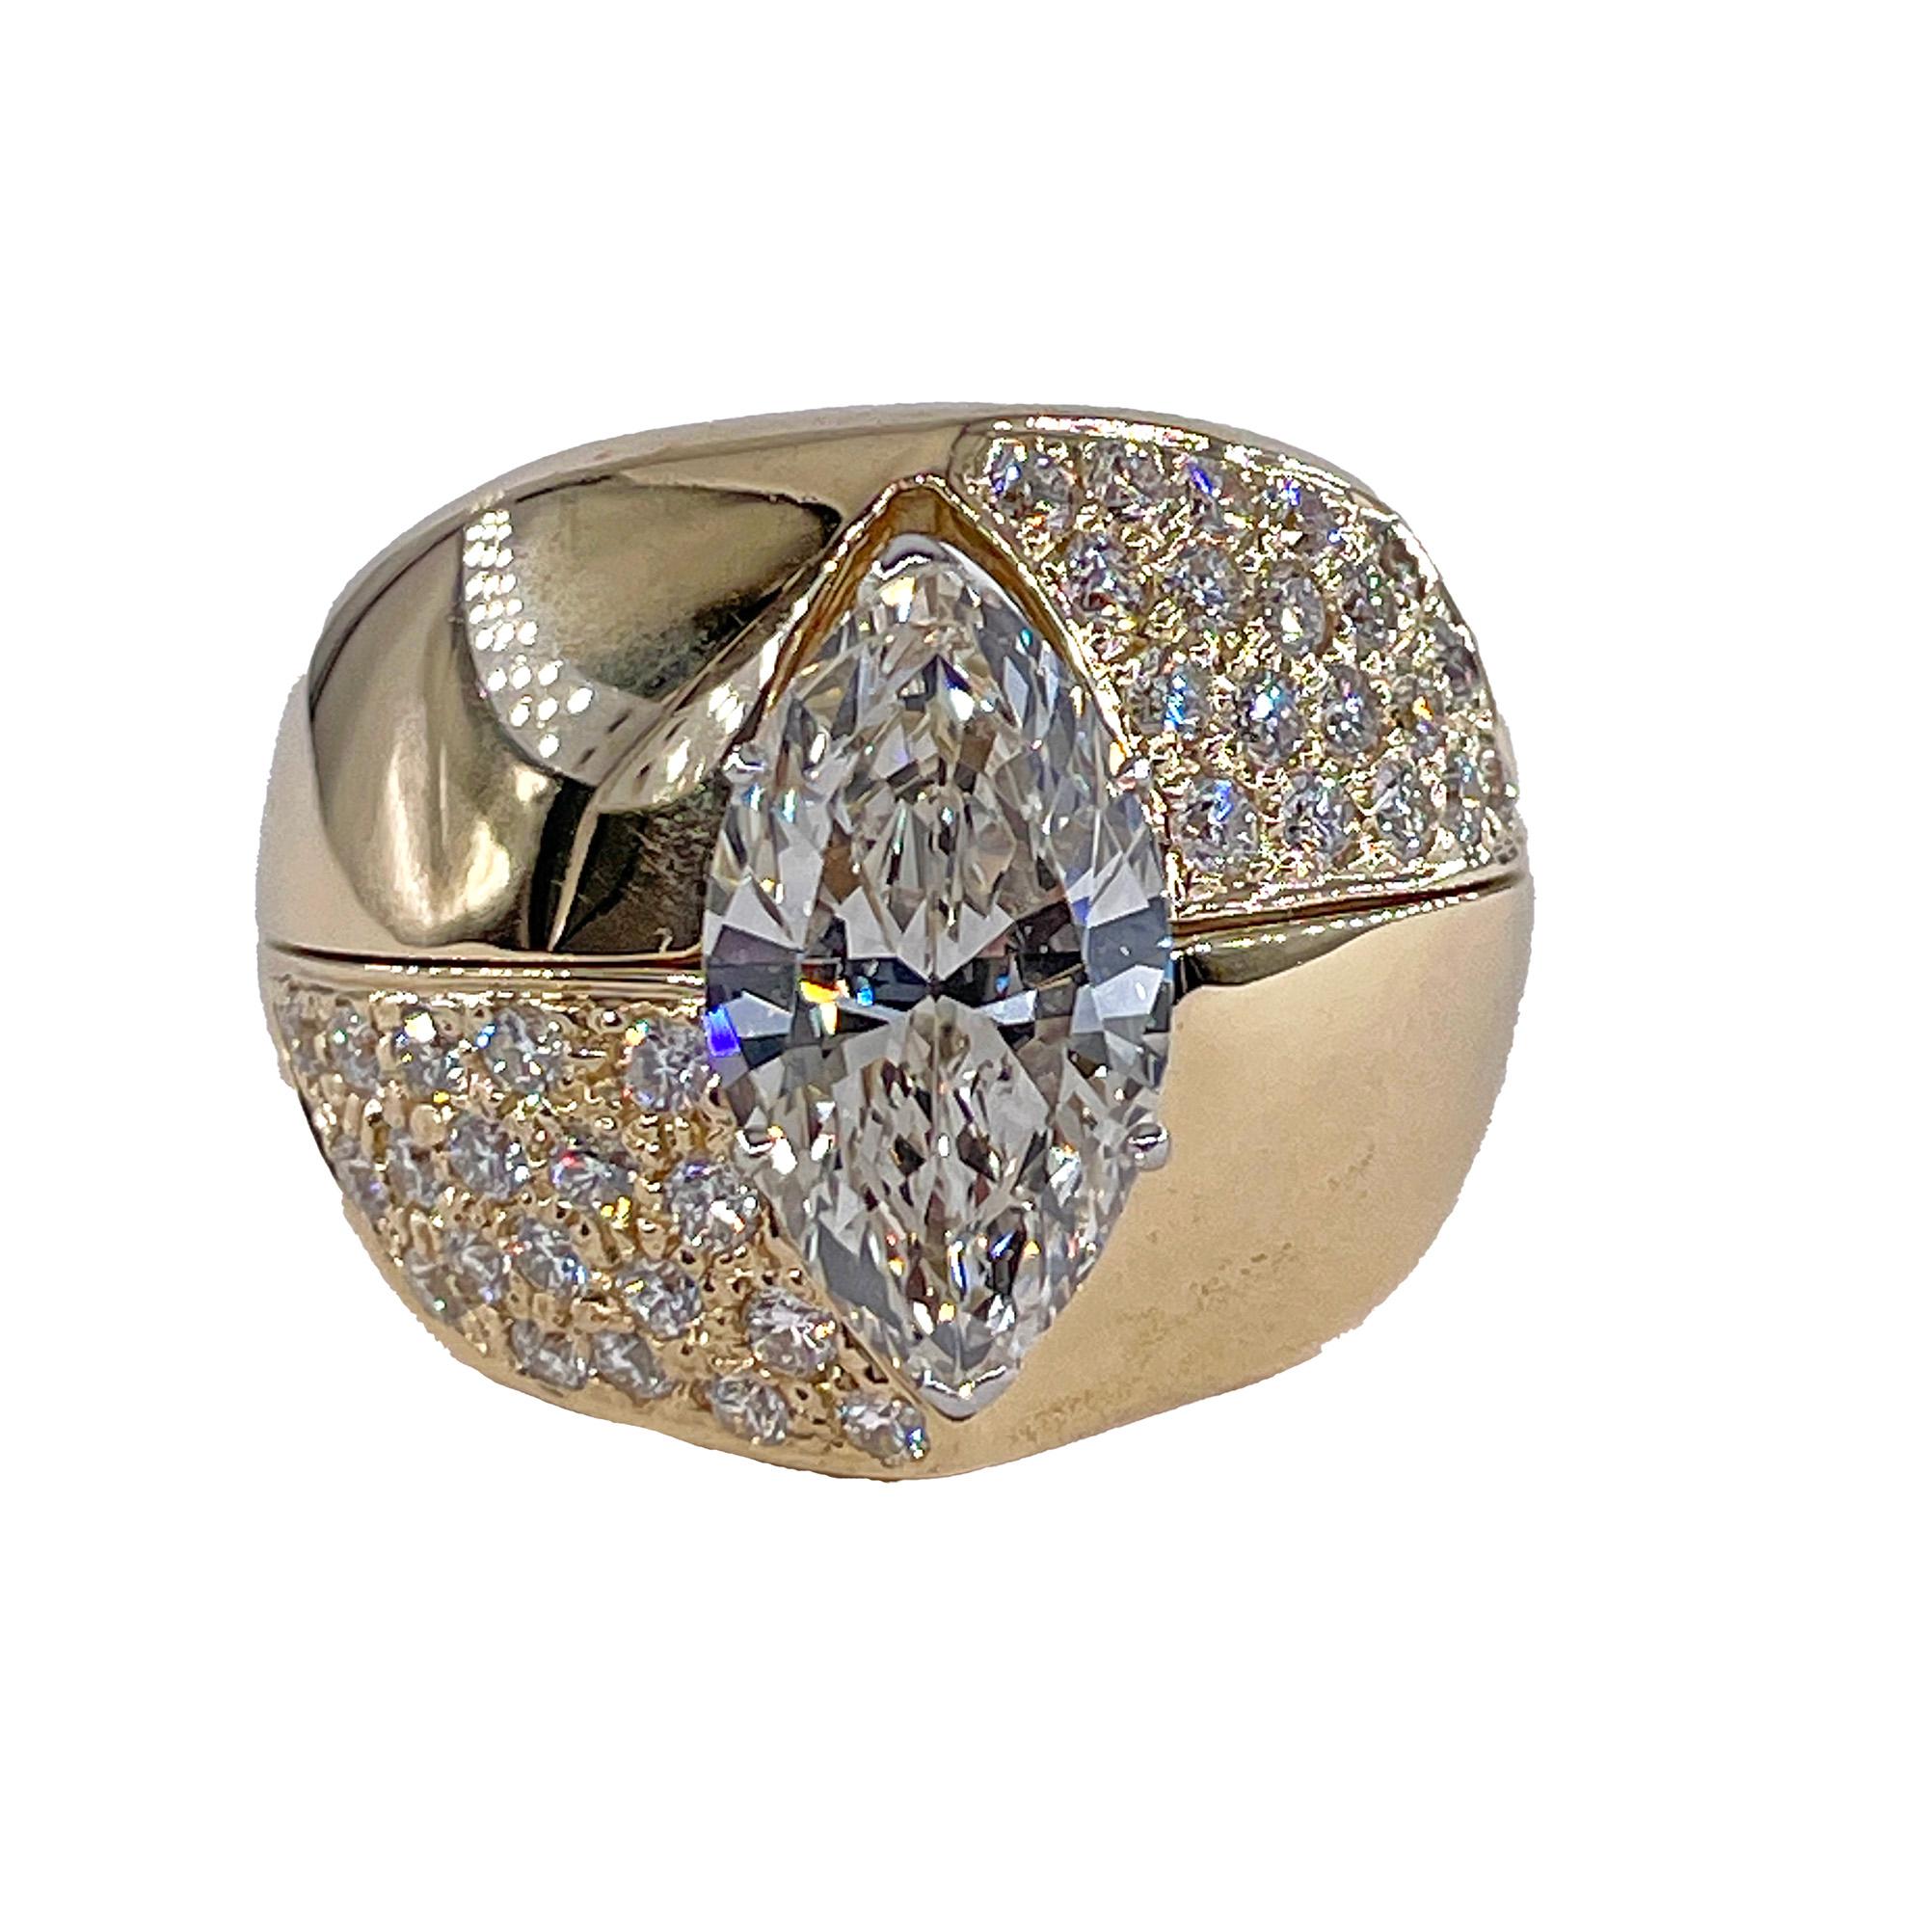 Vintage Diamond Engagement Three Stone Marquise Diamond Platinum Ring With Fitted 18K Yellow Gold Diamond Jacket

The 'Era of Excess', when bold and daring fashion, daring styles emblematic of the era. The era of demand for designer brands and